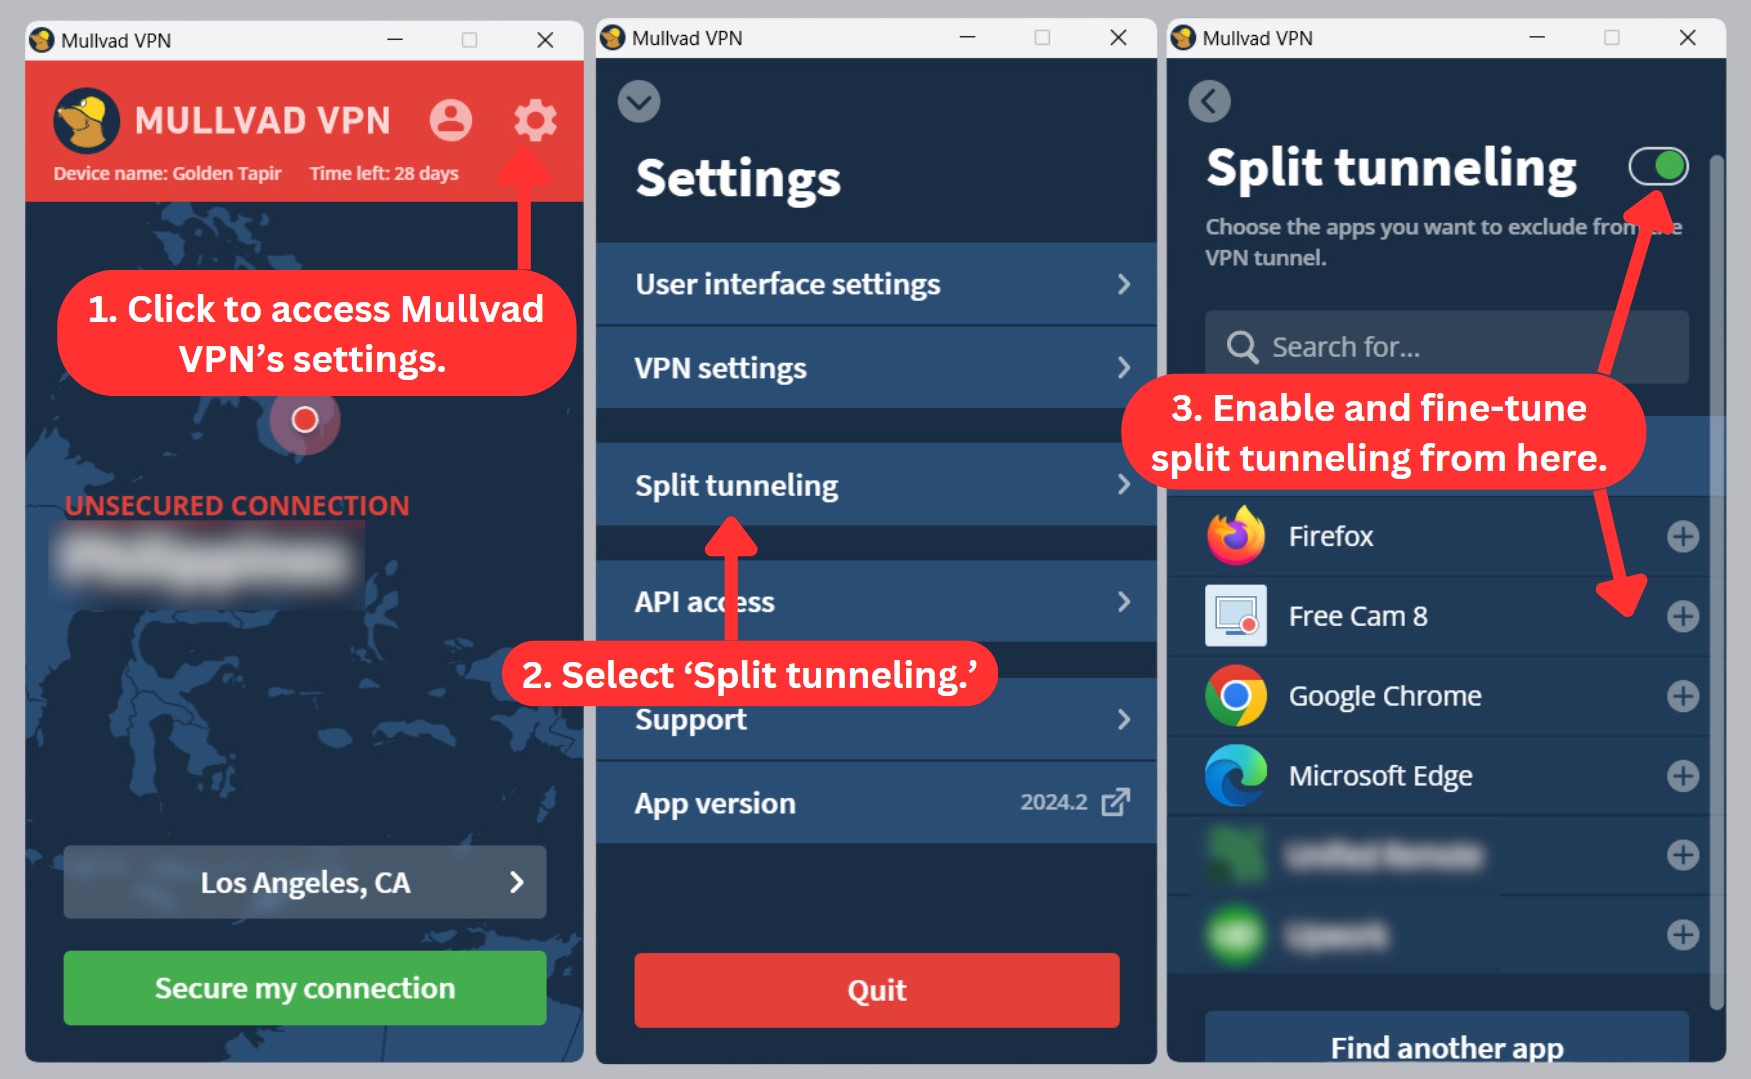 How to enable split tunneling on Mullvad VPN